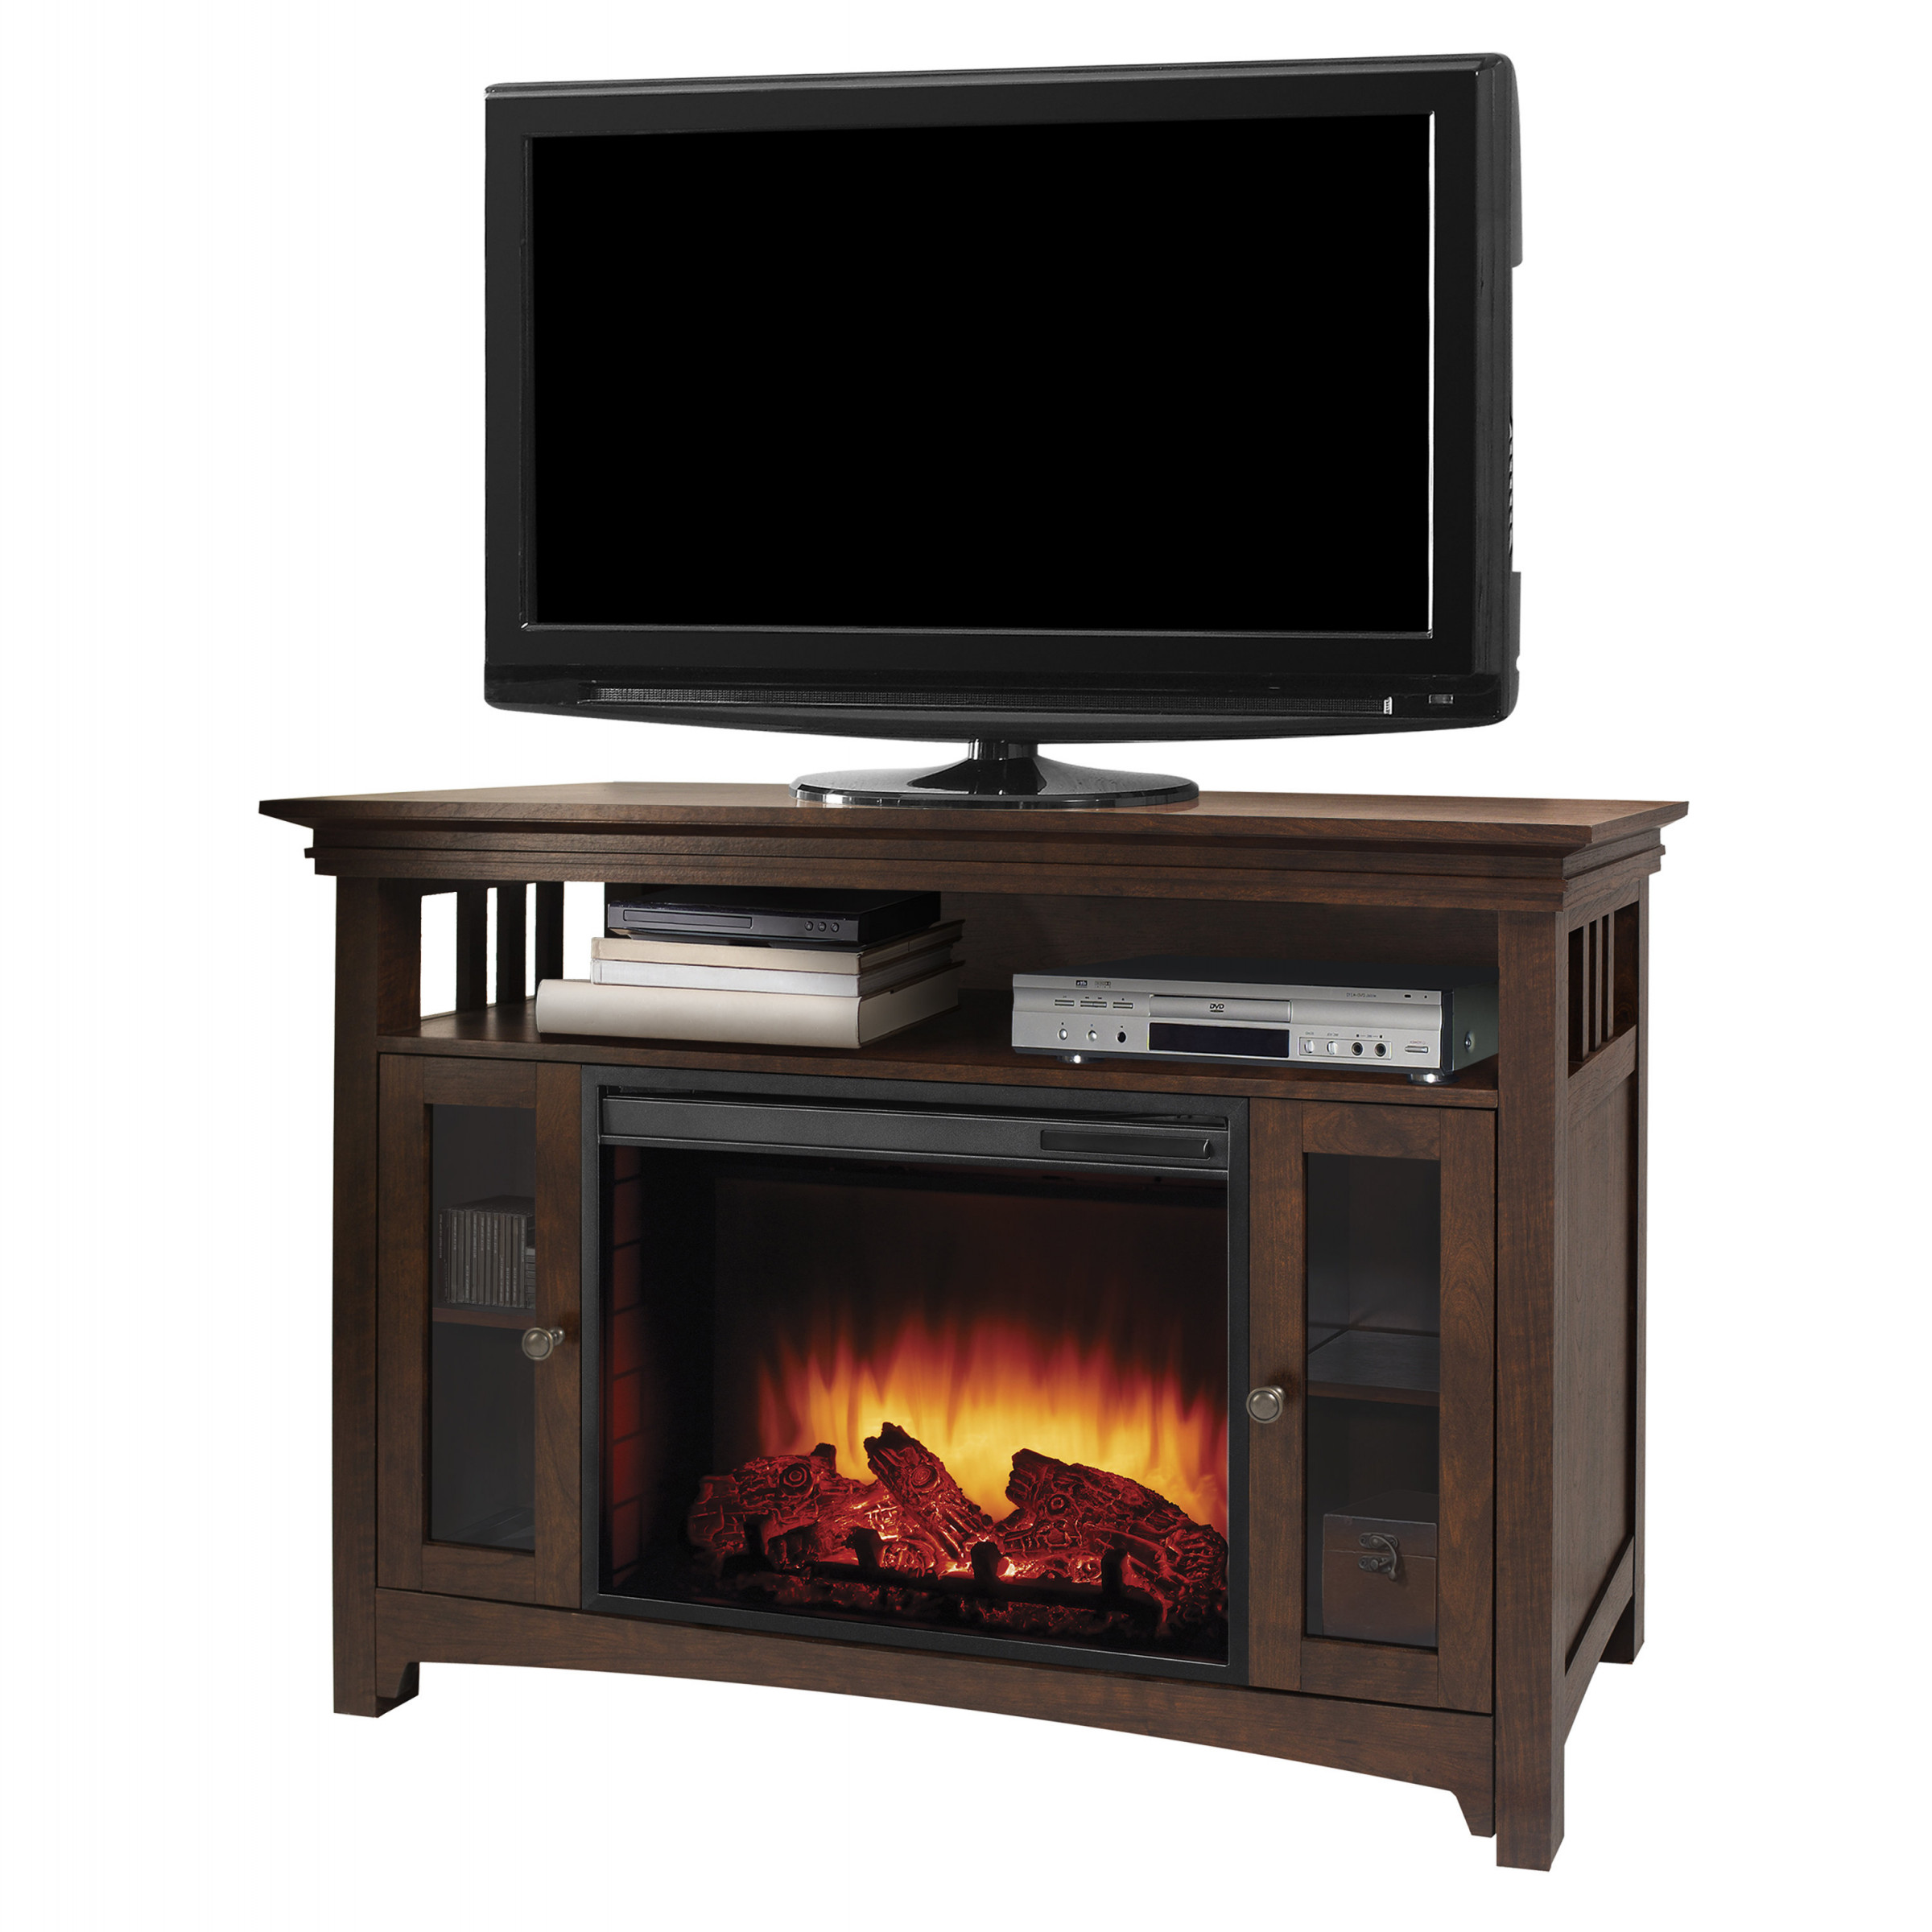 Cheap Fireplace Awesome 35 Minimaliste Electric Fireplace Tv Stand